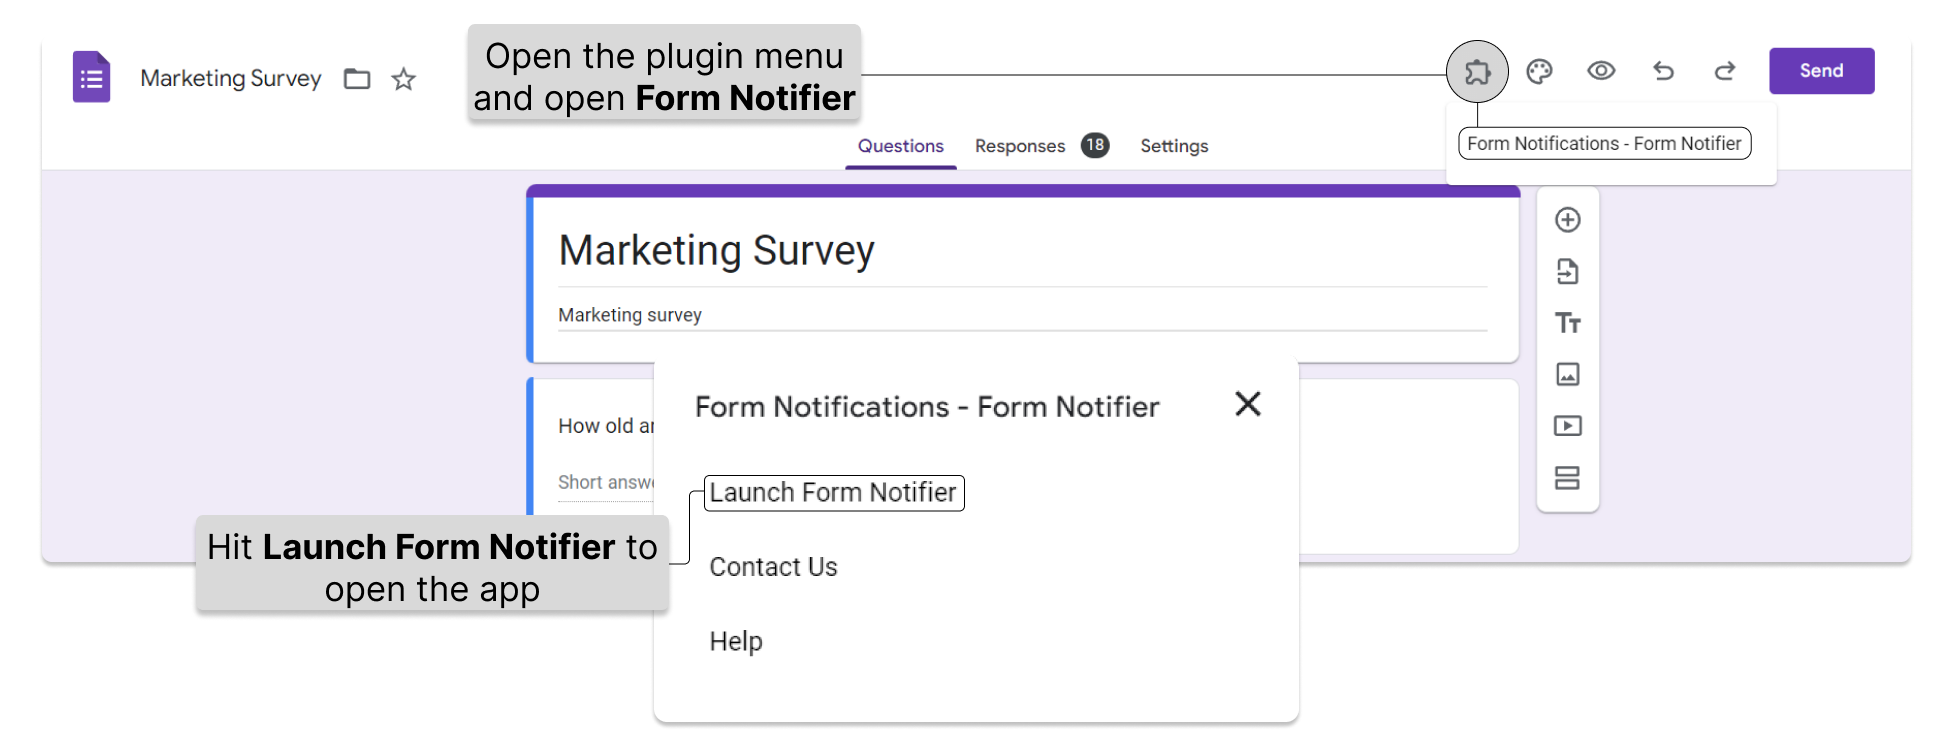 Learn how to launch Form Notifier in Google Forms